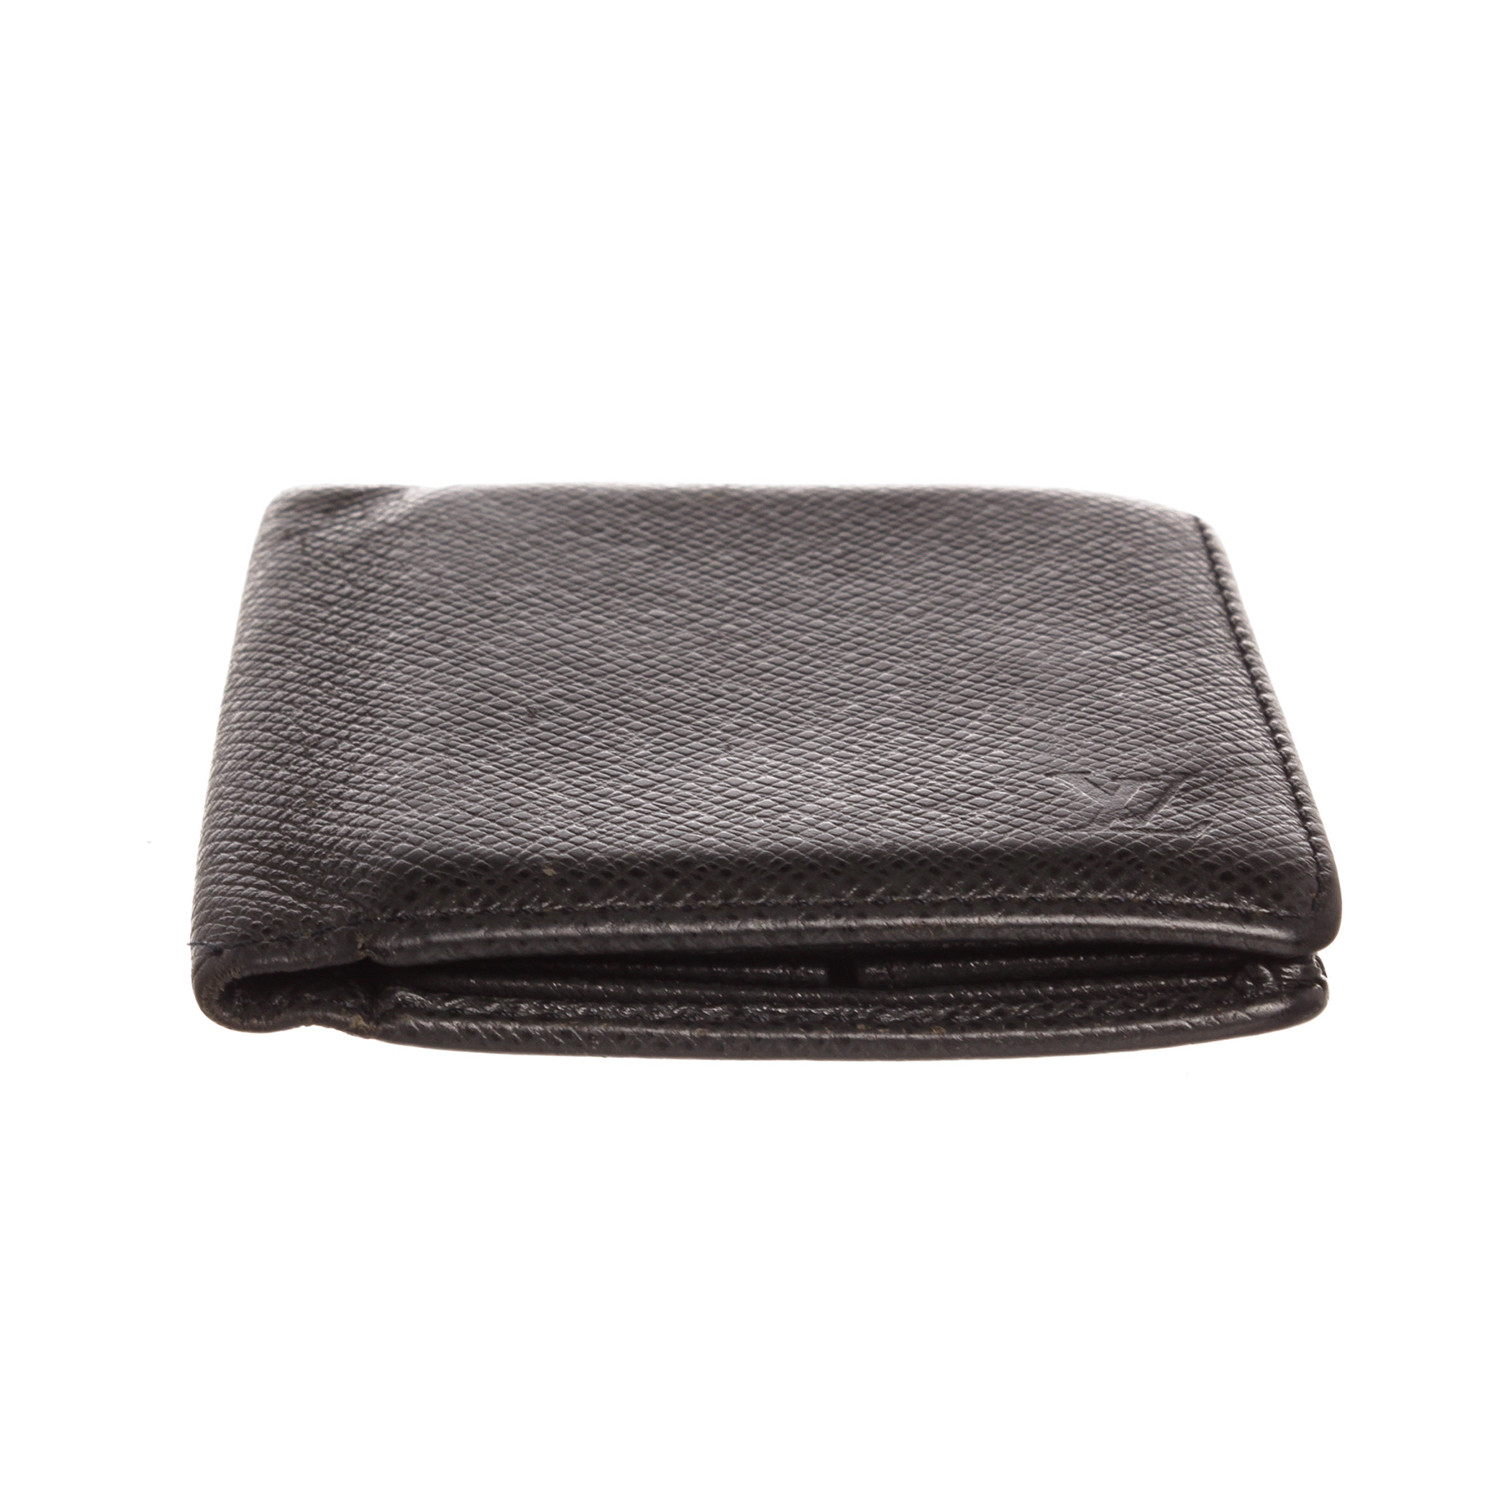 Louis Vuitton // Black Taiga Leather Bifold Wallet // CT0027 // Pre-Owned - Pre-Owned Designer ...